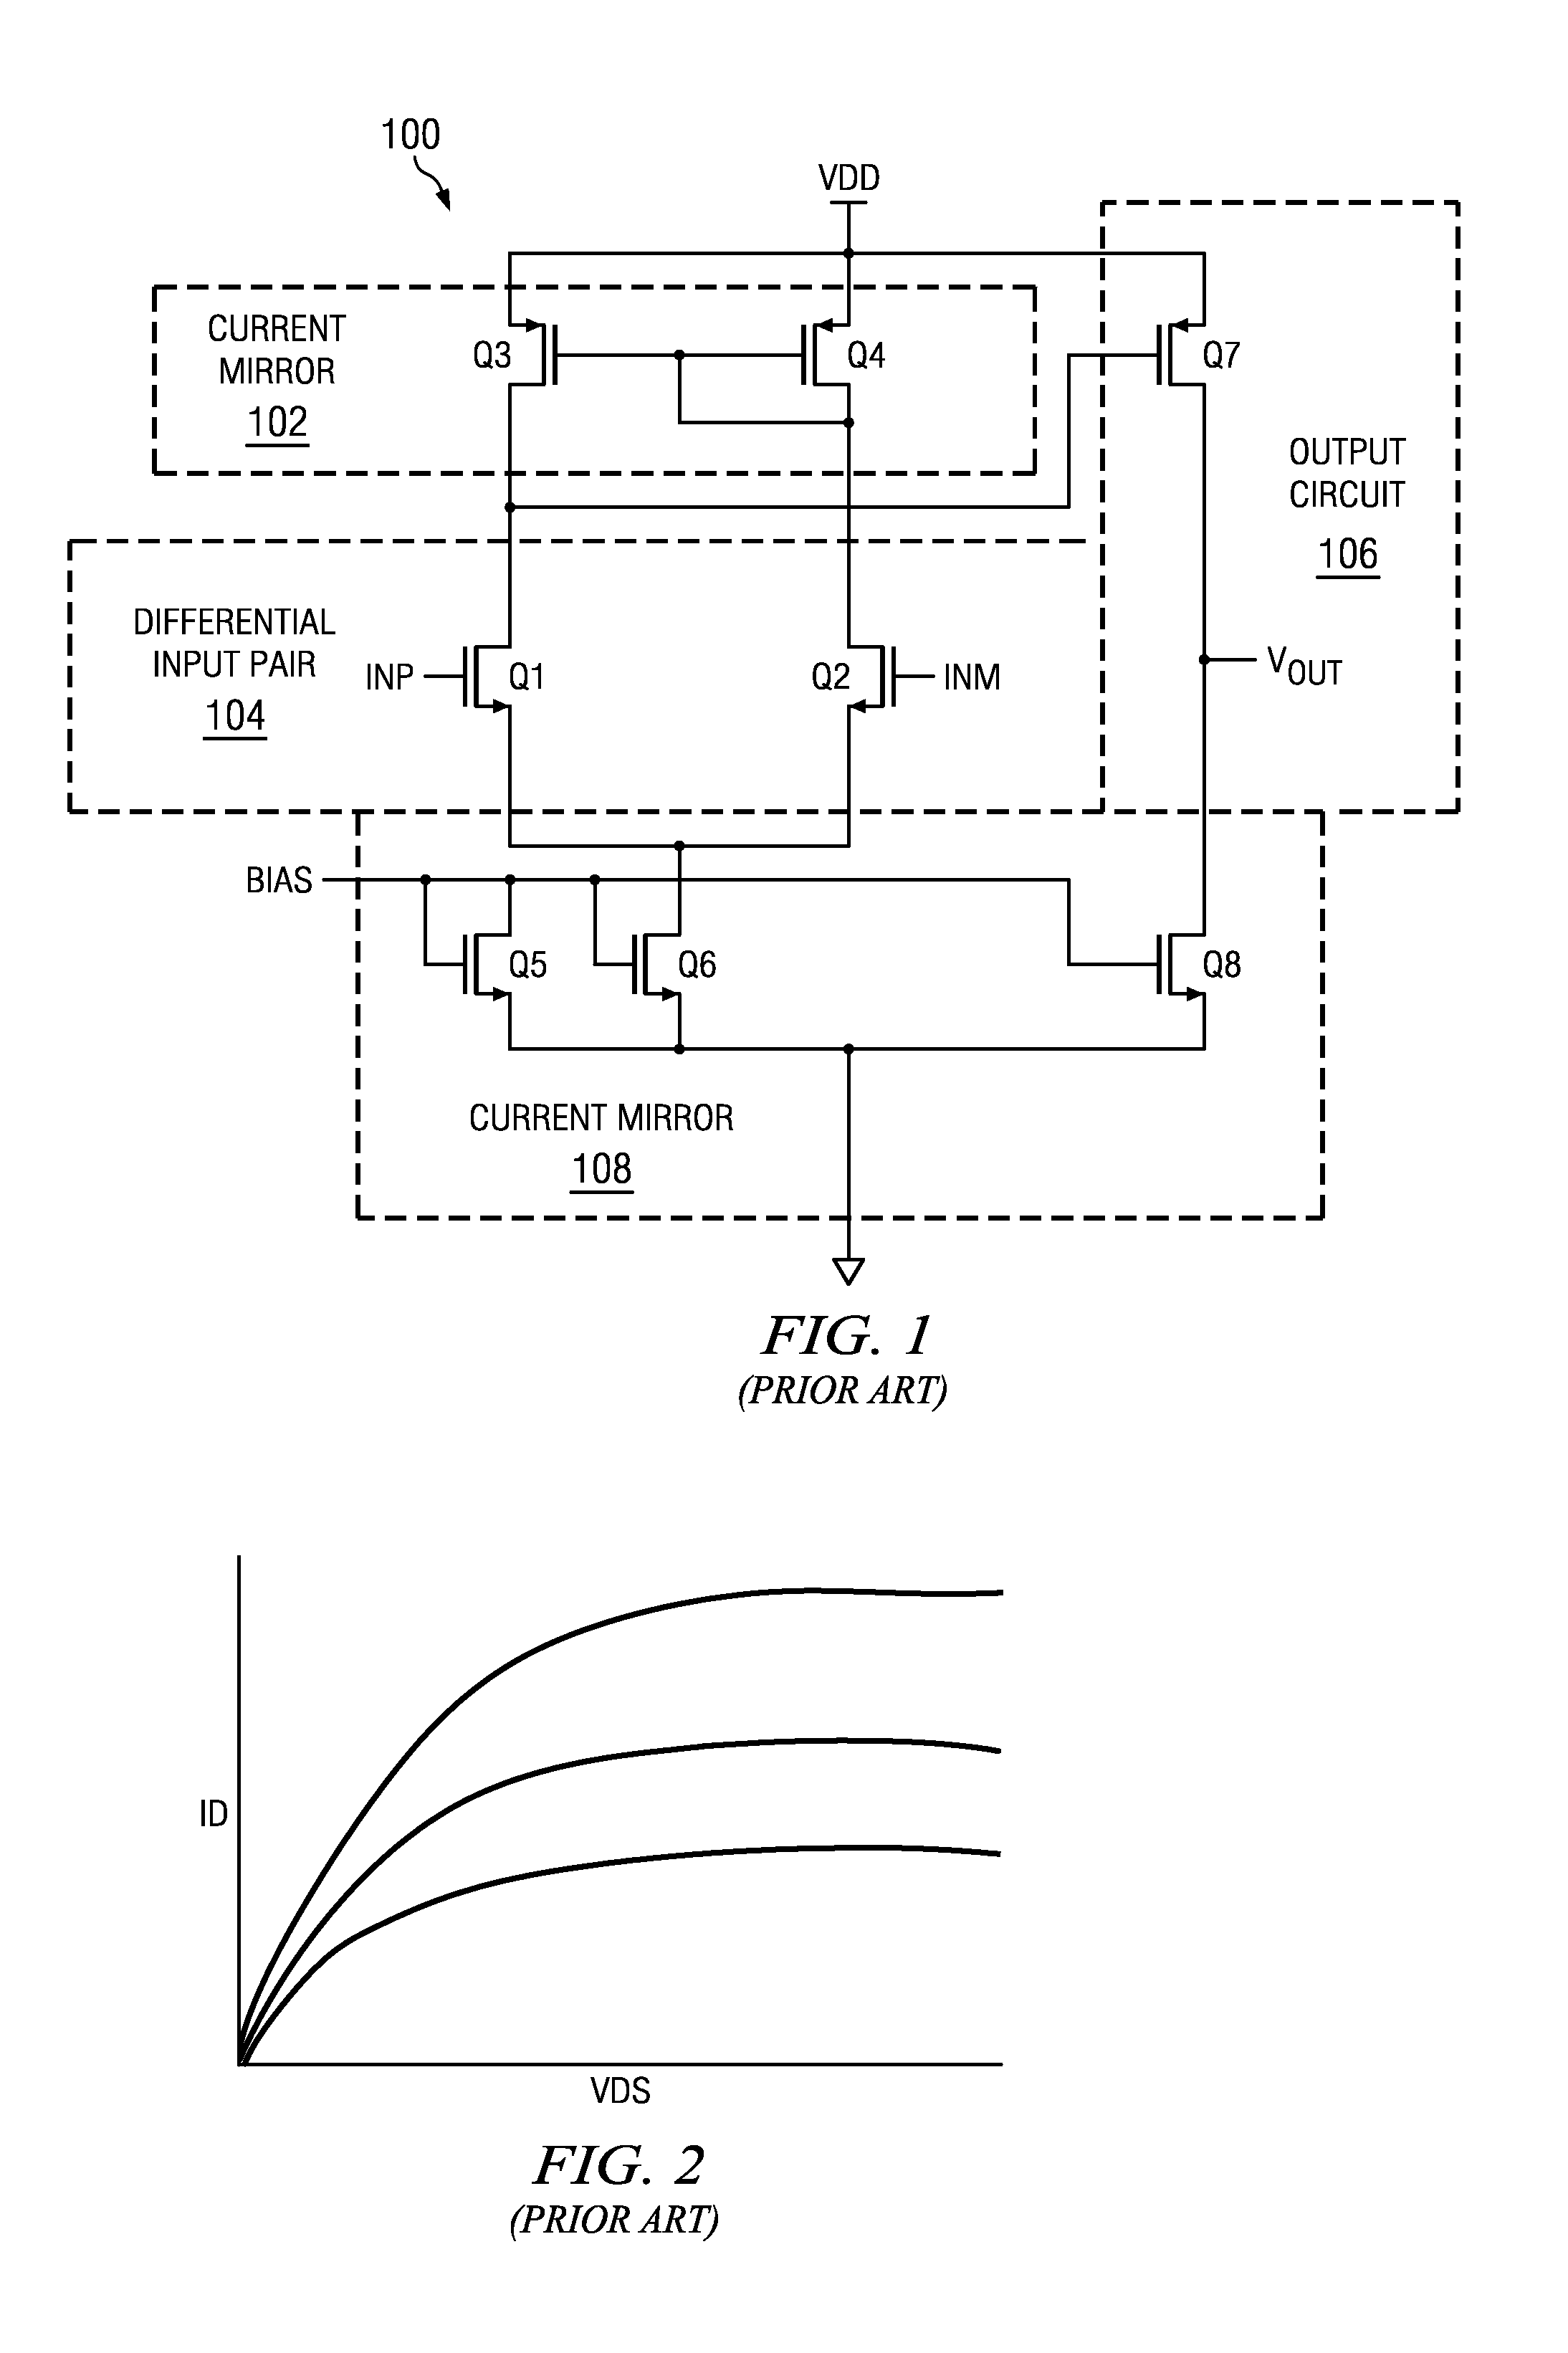 Differential input for ambipolar devices